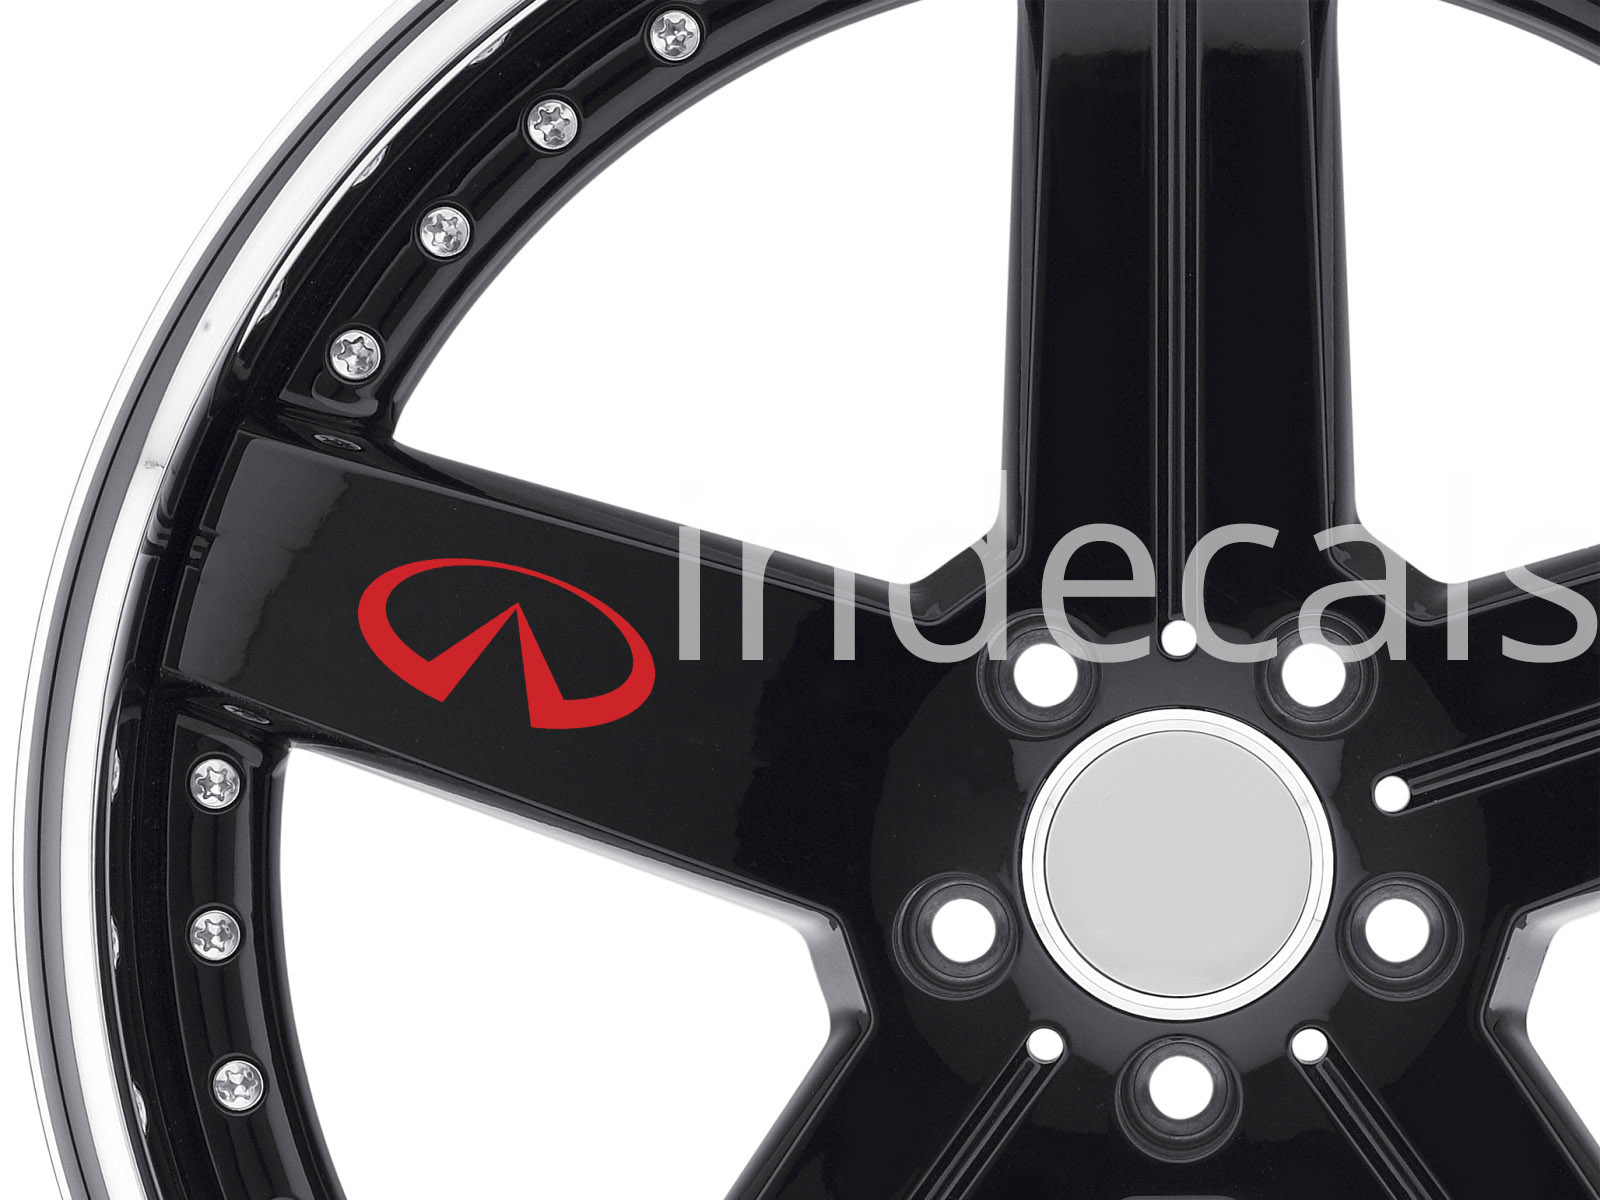 6 x Infiniti Stickers for Wheels - Red